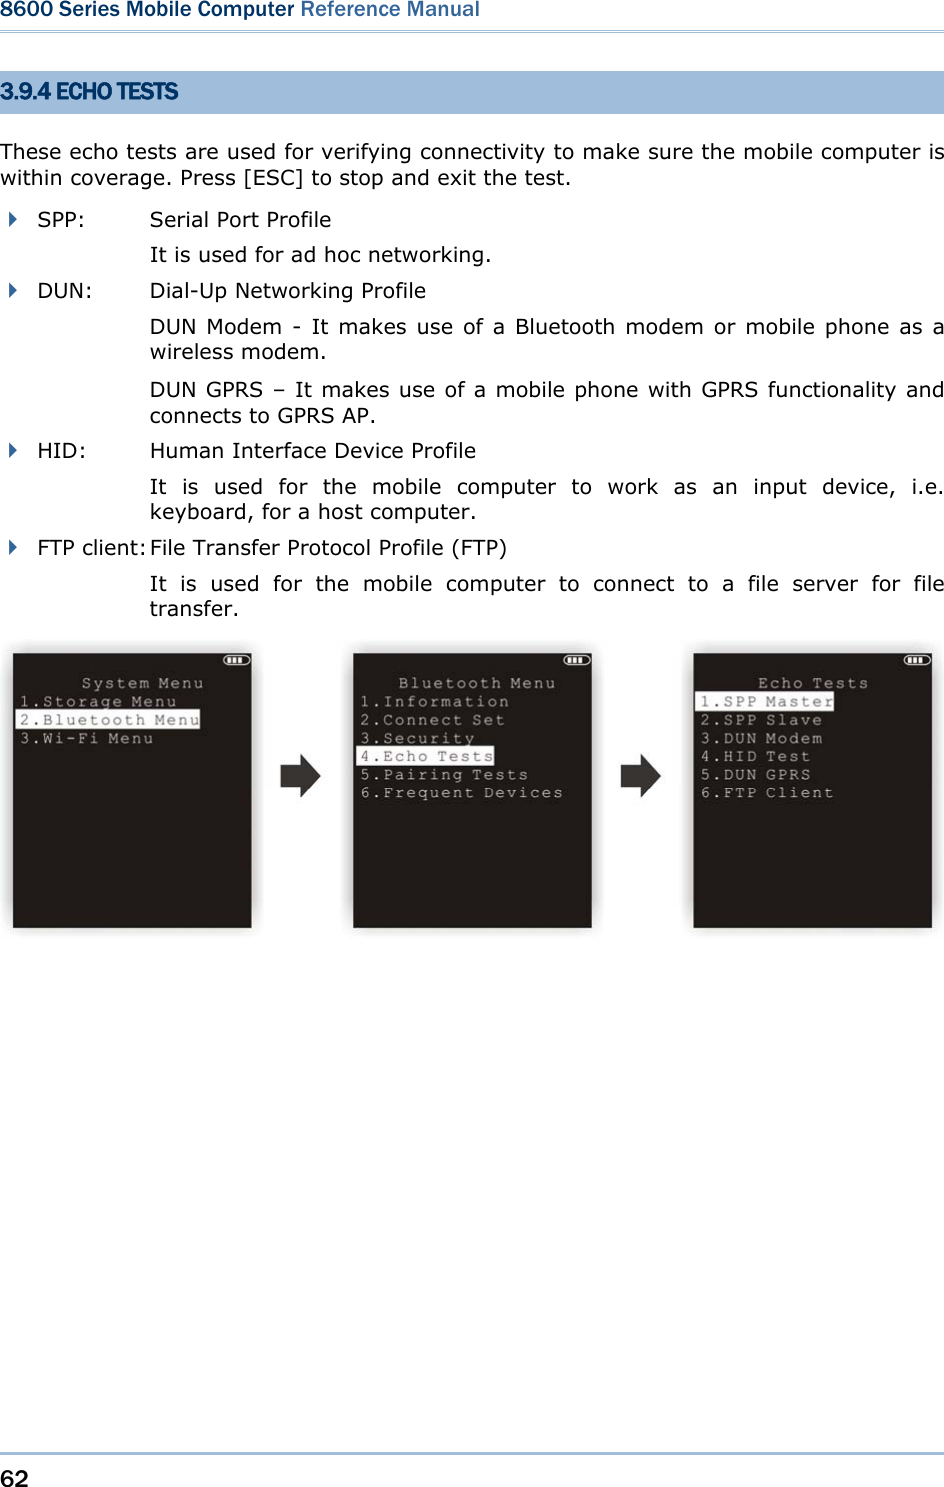 62  8600 Series Mobile Computer Reference Manual  3.9.4 ECHO TESTS These echo tests are used for verifying connectivity to make sure the mobile computer is within coverage. Press [ESC] to stop and exit the test.    SPP:    Serial Port Profile     It is used for ad hoc networking.  DUN: Dial-Up Networking Profile DUN Modem - It makes use of a Bluetooth modem or mobile phone as a wireless modem.   DUN GPRS – It makes use of a mobile phone with GPRS functionality and connects to GPRS AP.  HID:    Human Interface Device Profile It is used for the mobile computer to work as an input device, i.e. keyboard, for a host computer.  FTP client: File Transfer Protocol Profile (FTP) It is used for the mobile computer to connect to a file server for file transfer.    